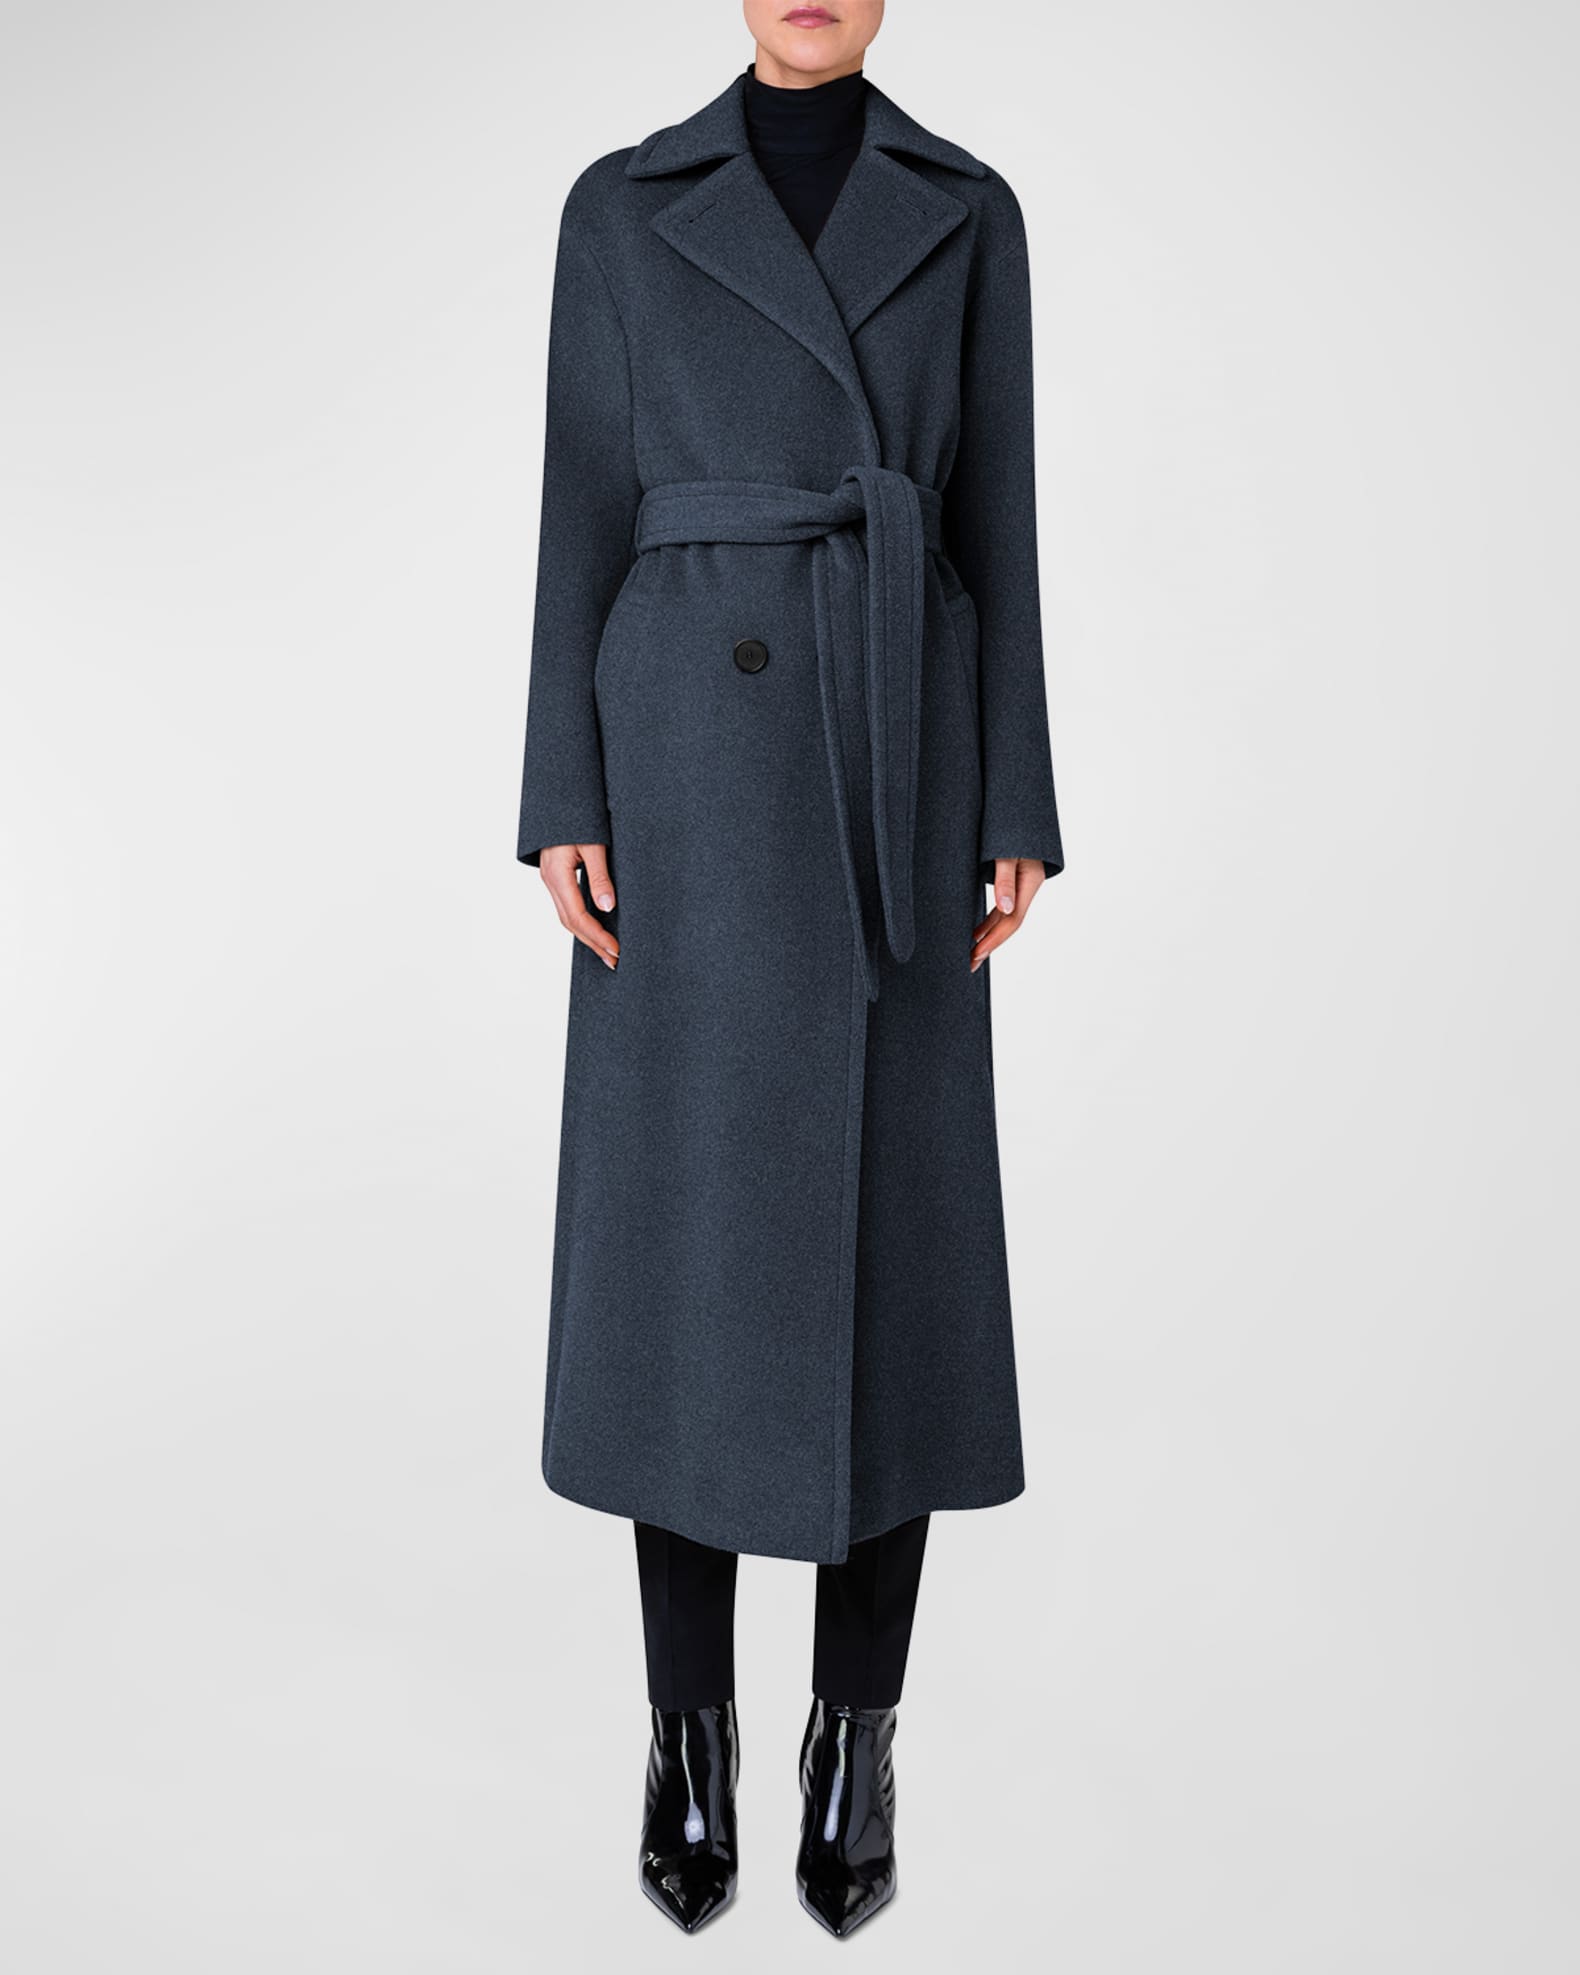 Akris punto Long Double-Breast Belted Wool-Cashmere Coat | Neiman Marcus